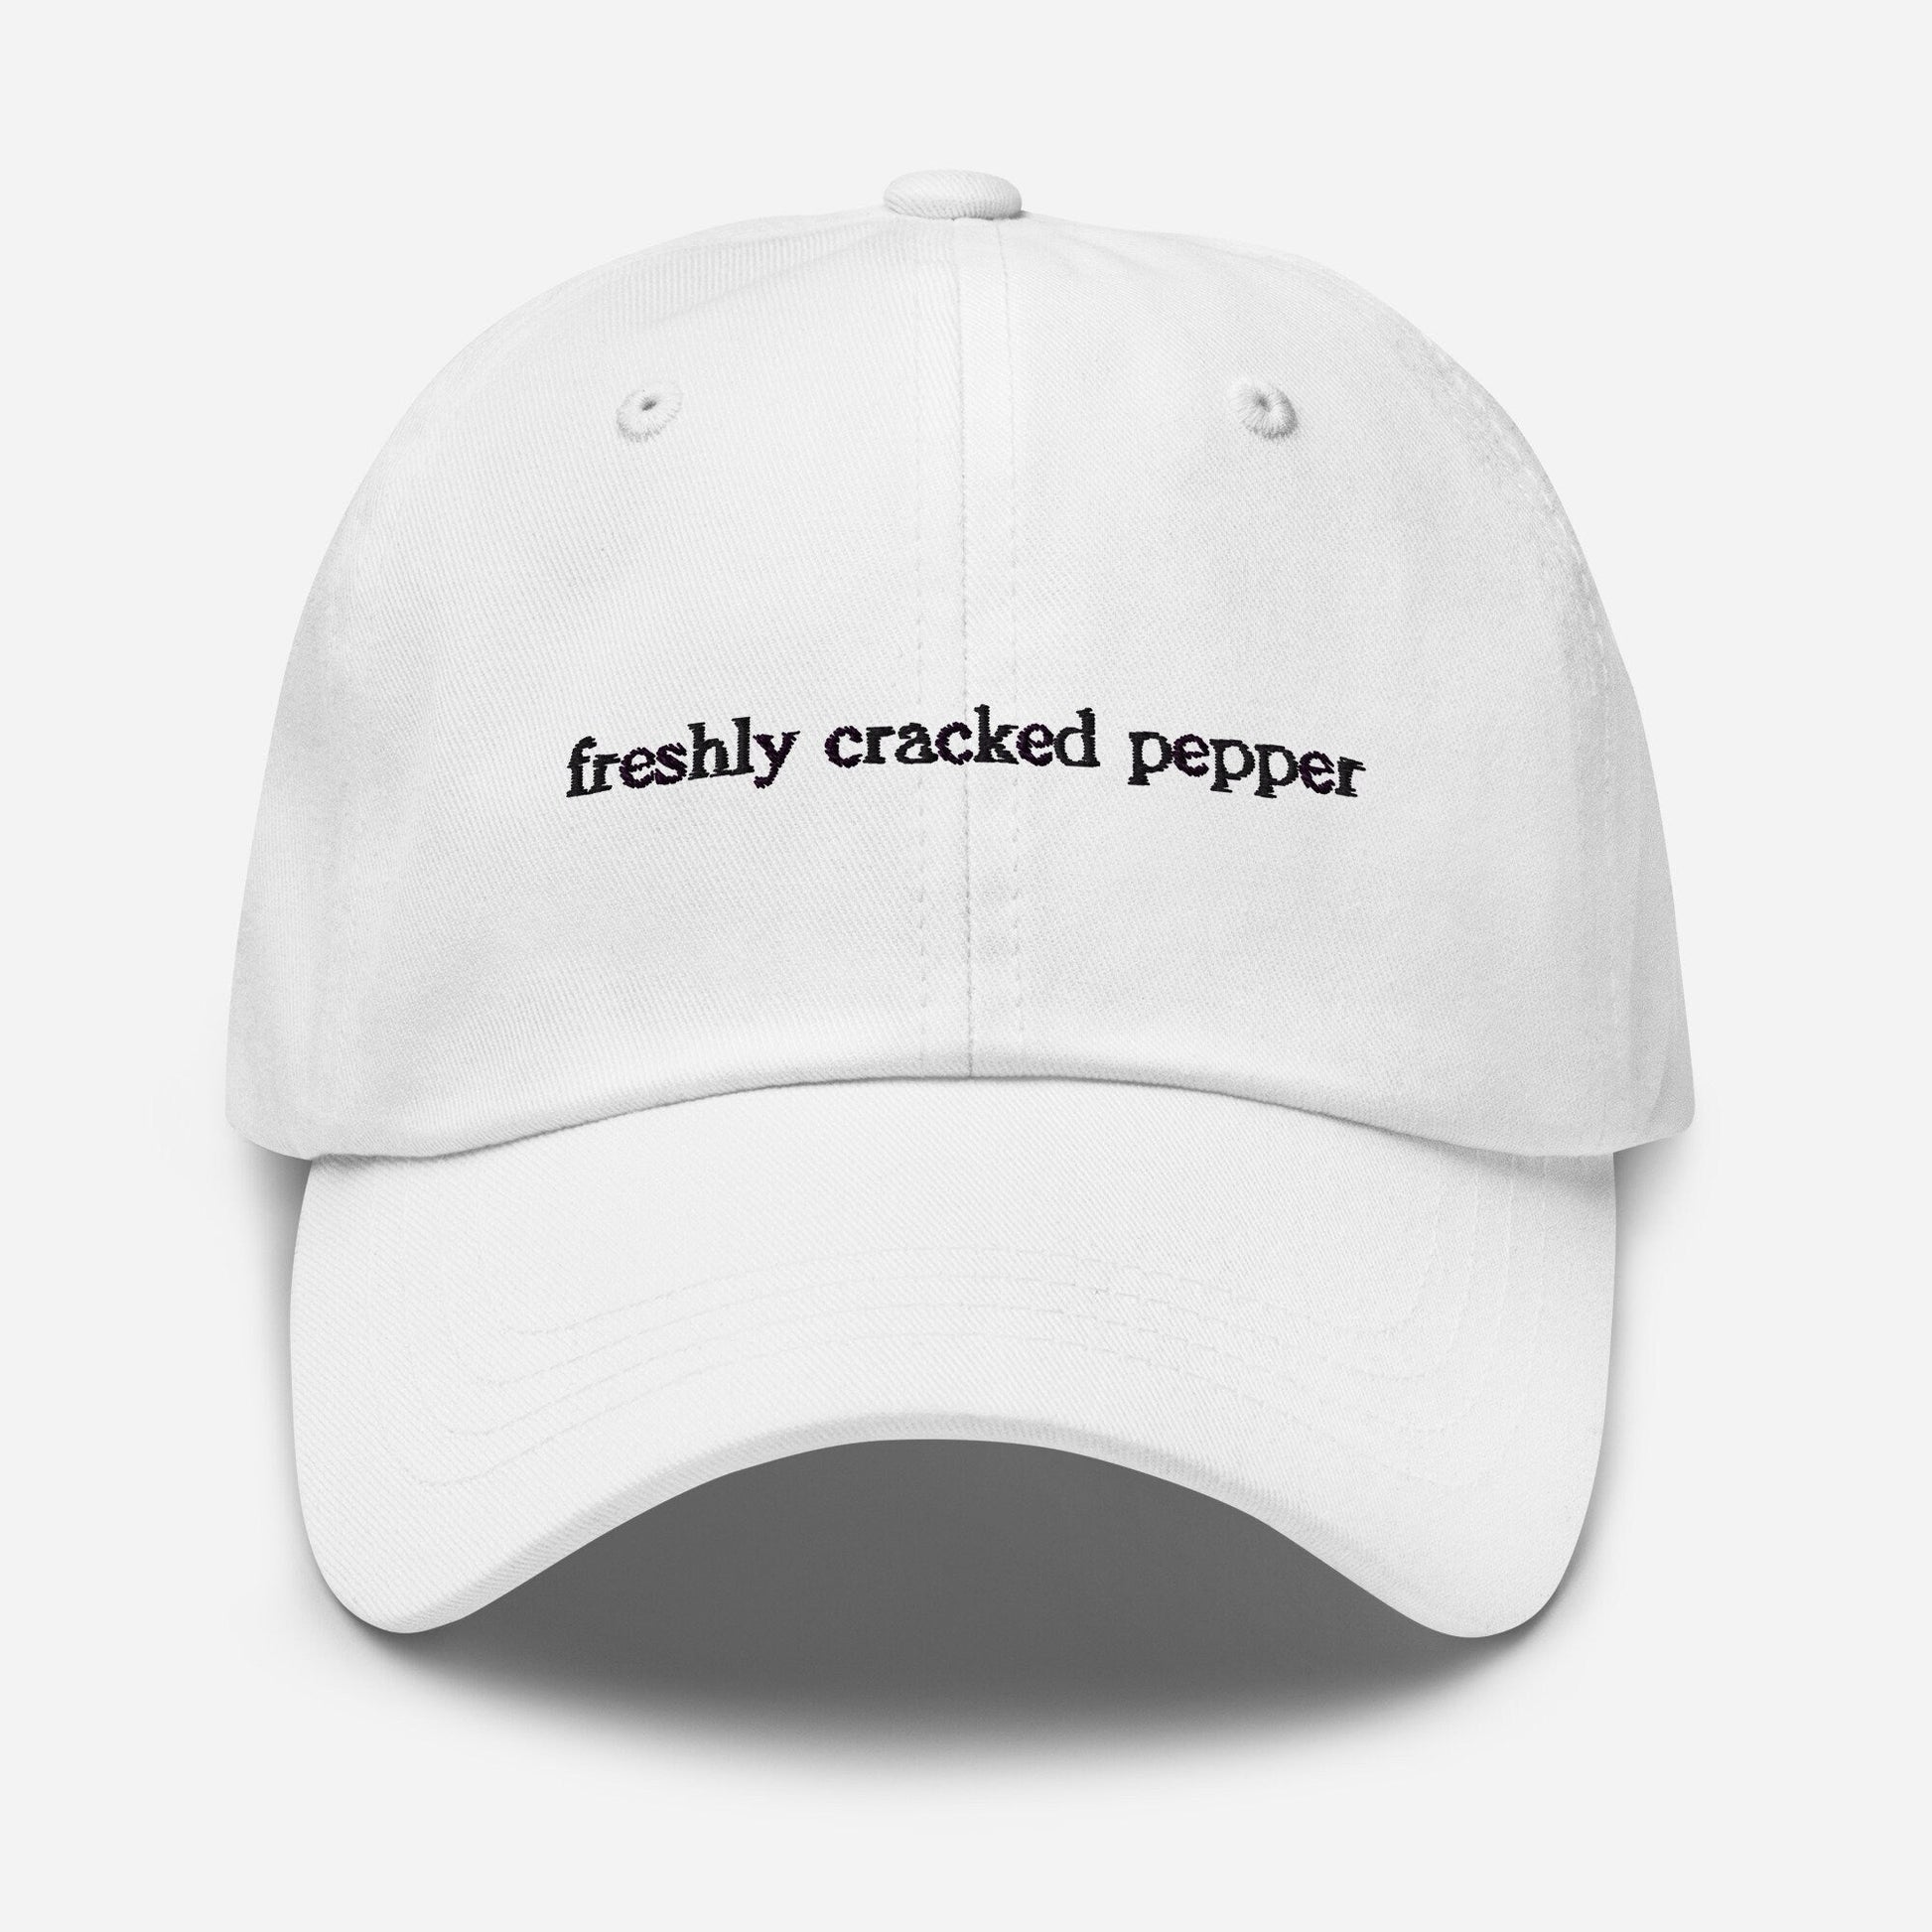 Cracked Pepper Dad Hat - Gift for Home Chef Food Fans - Embroidered Cotton Cap